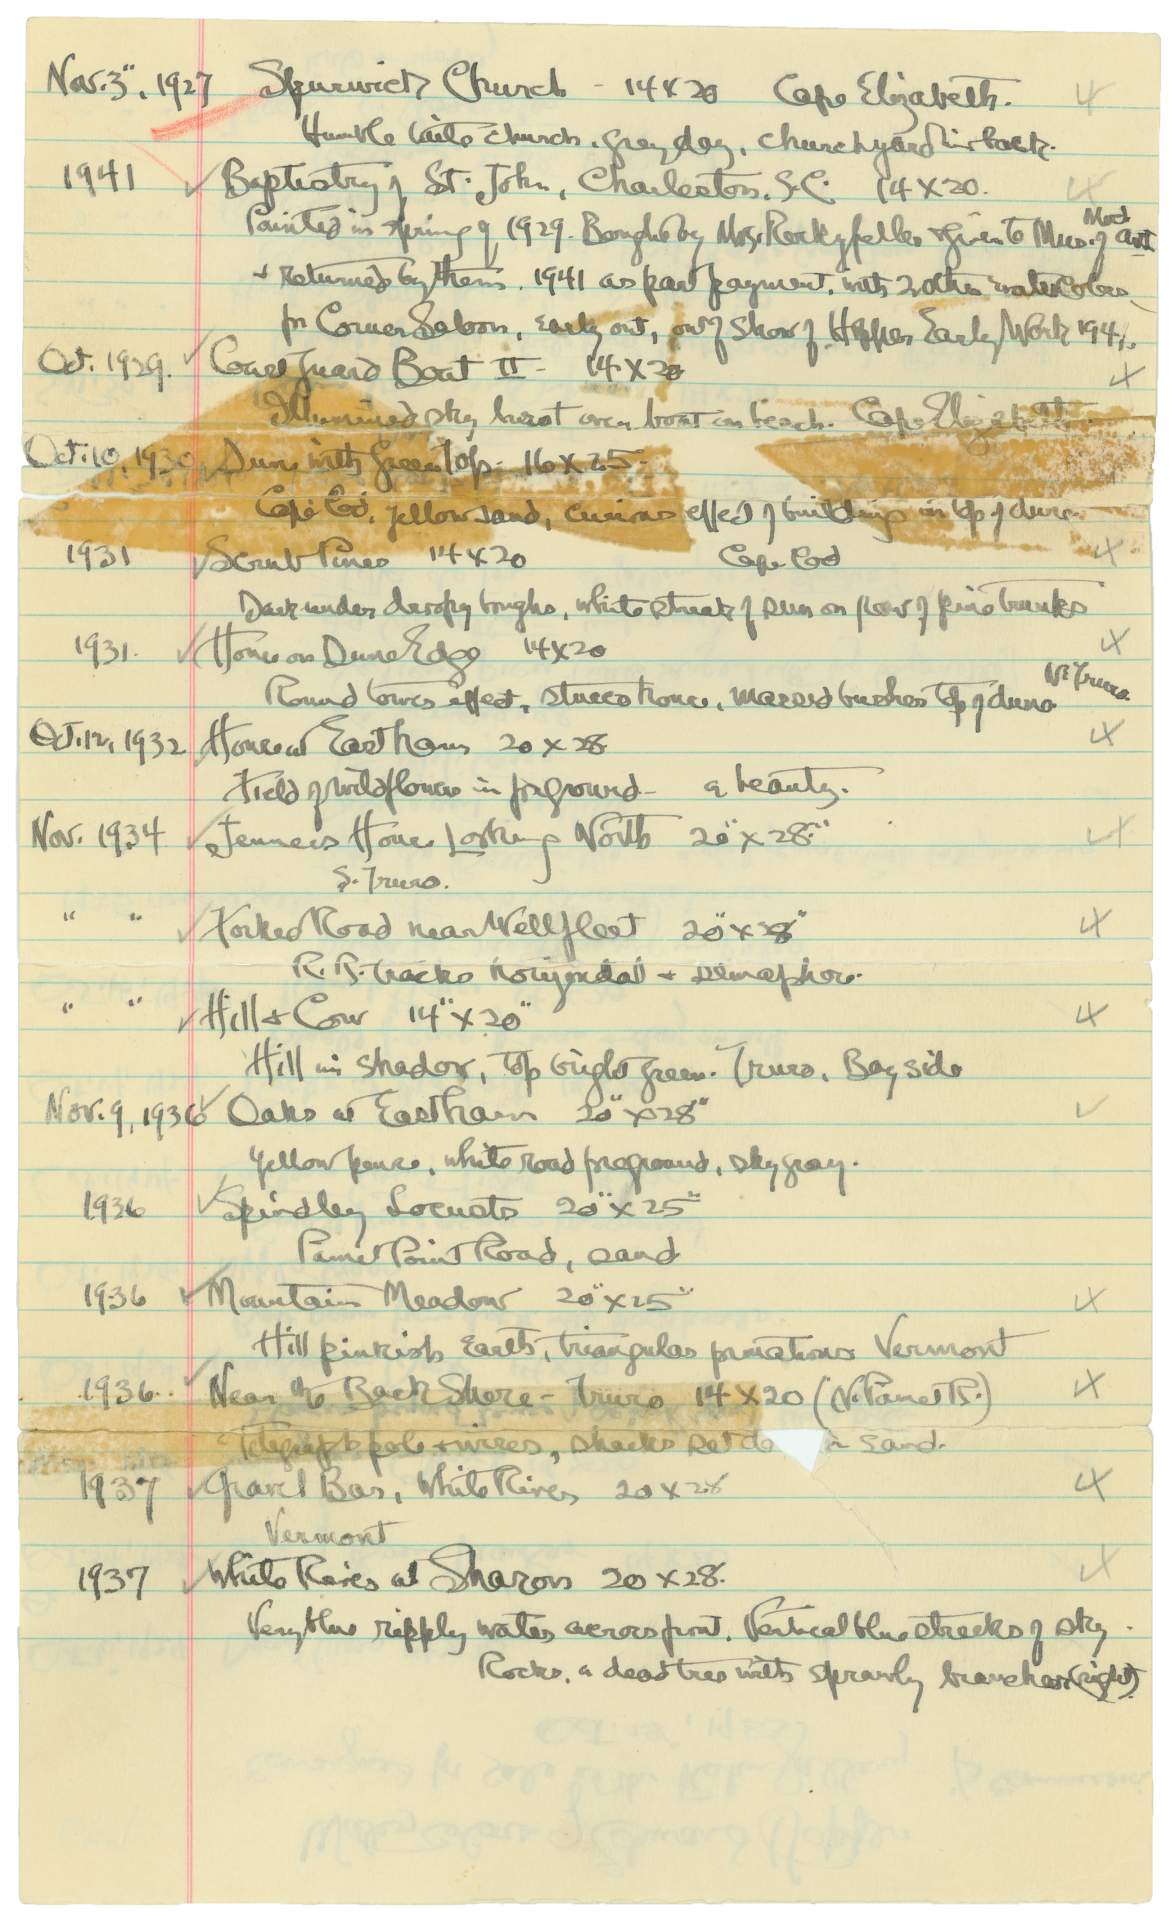 Inventories of the work of Edward Hopper - Watercolors pg 2